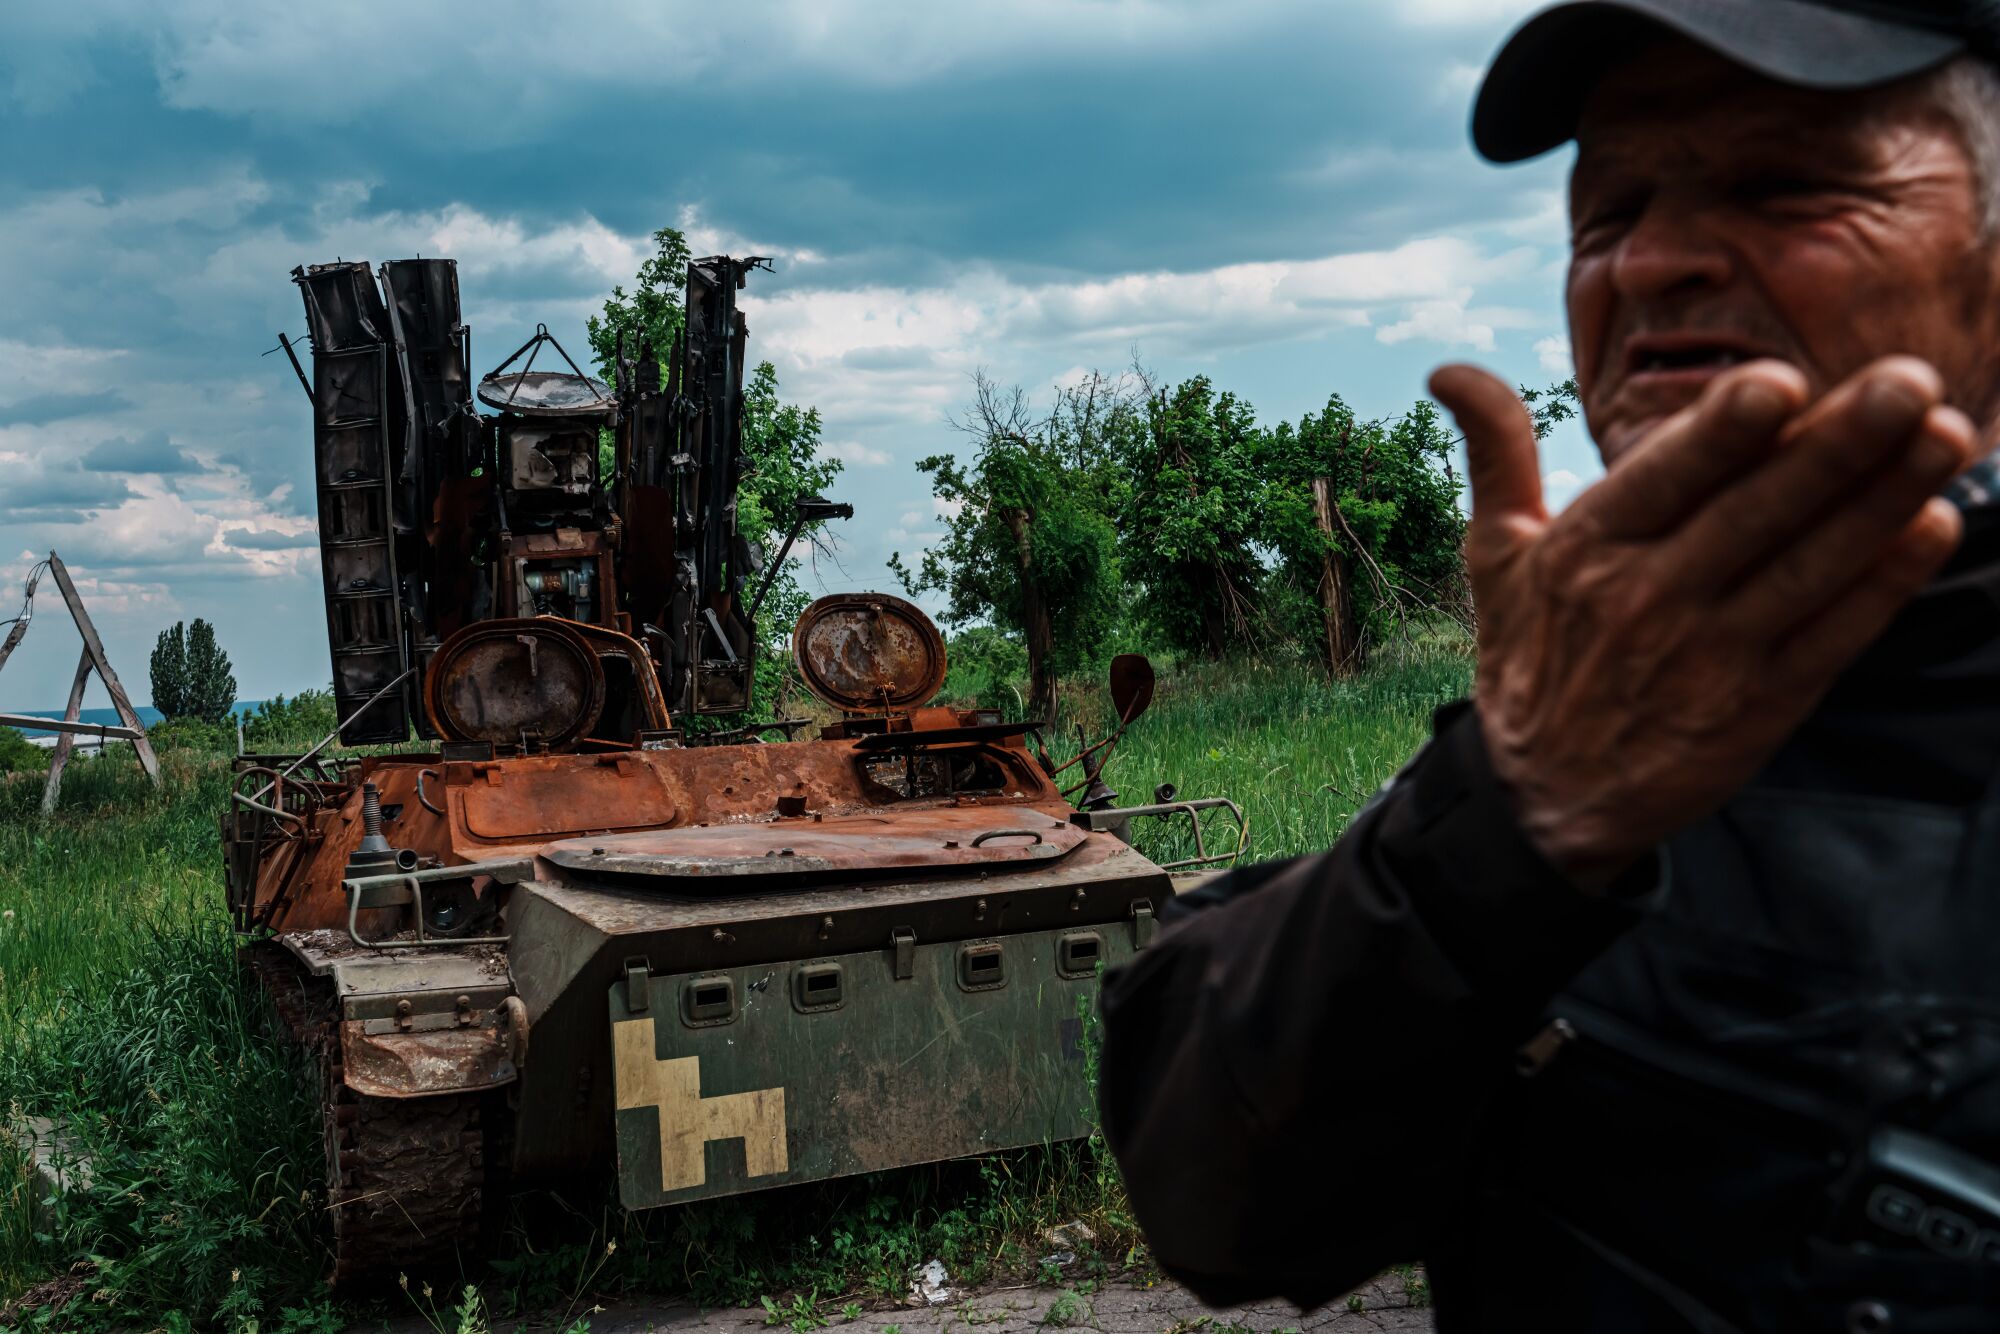 A man gestures near the hulking wreckage of a military vehicle in a grassy area 